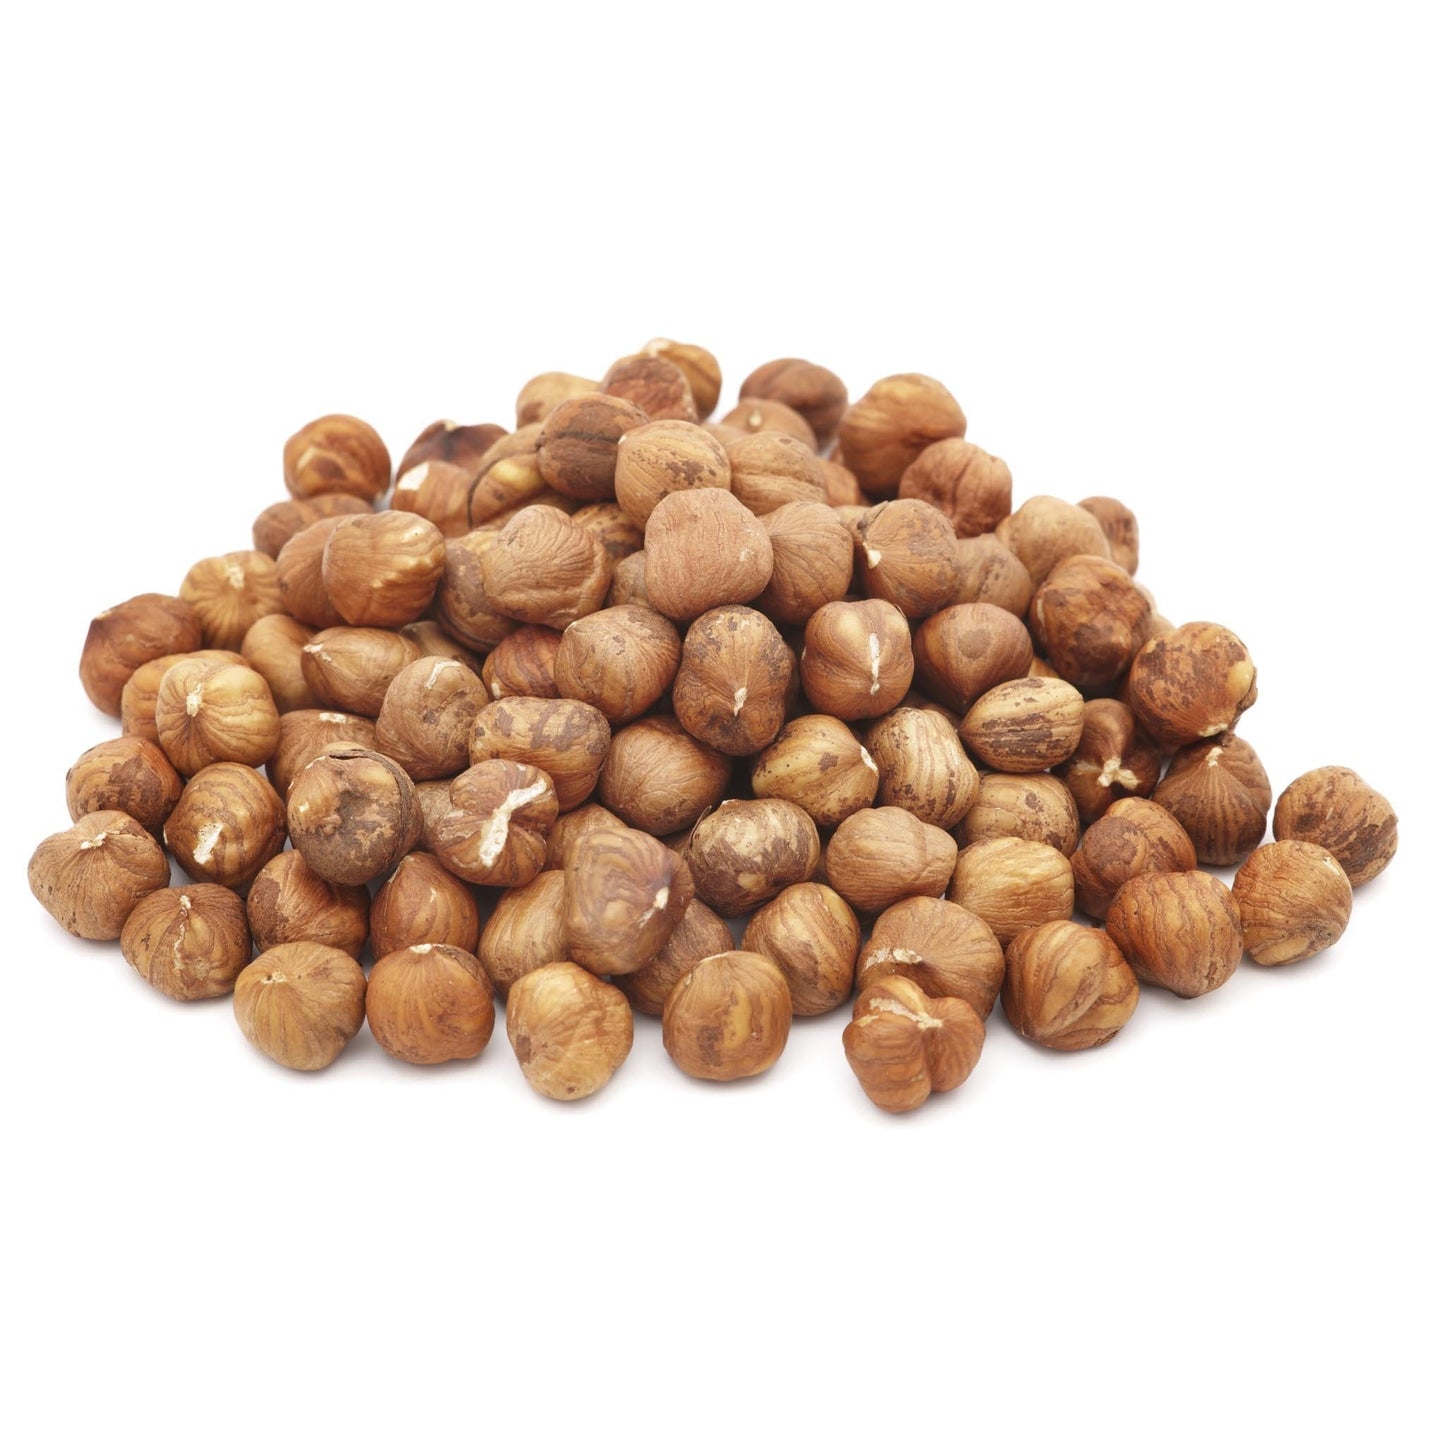 Hazelnuts - Natural With Skin 25 LB